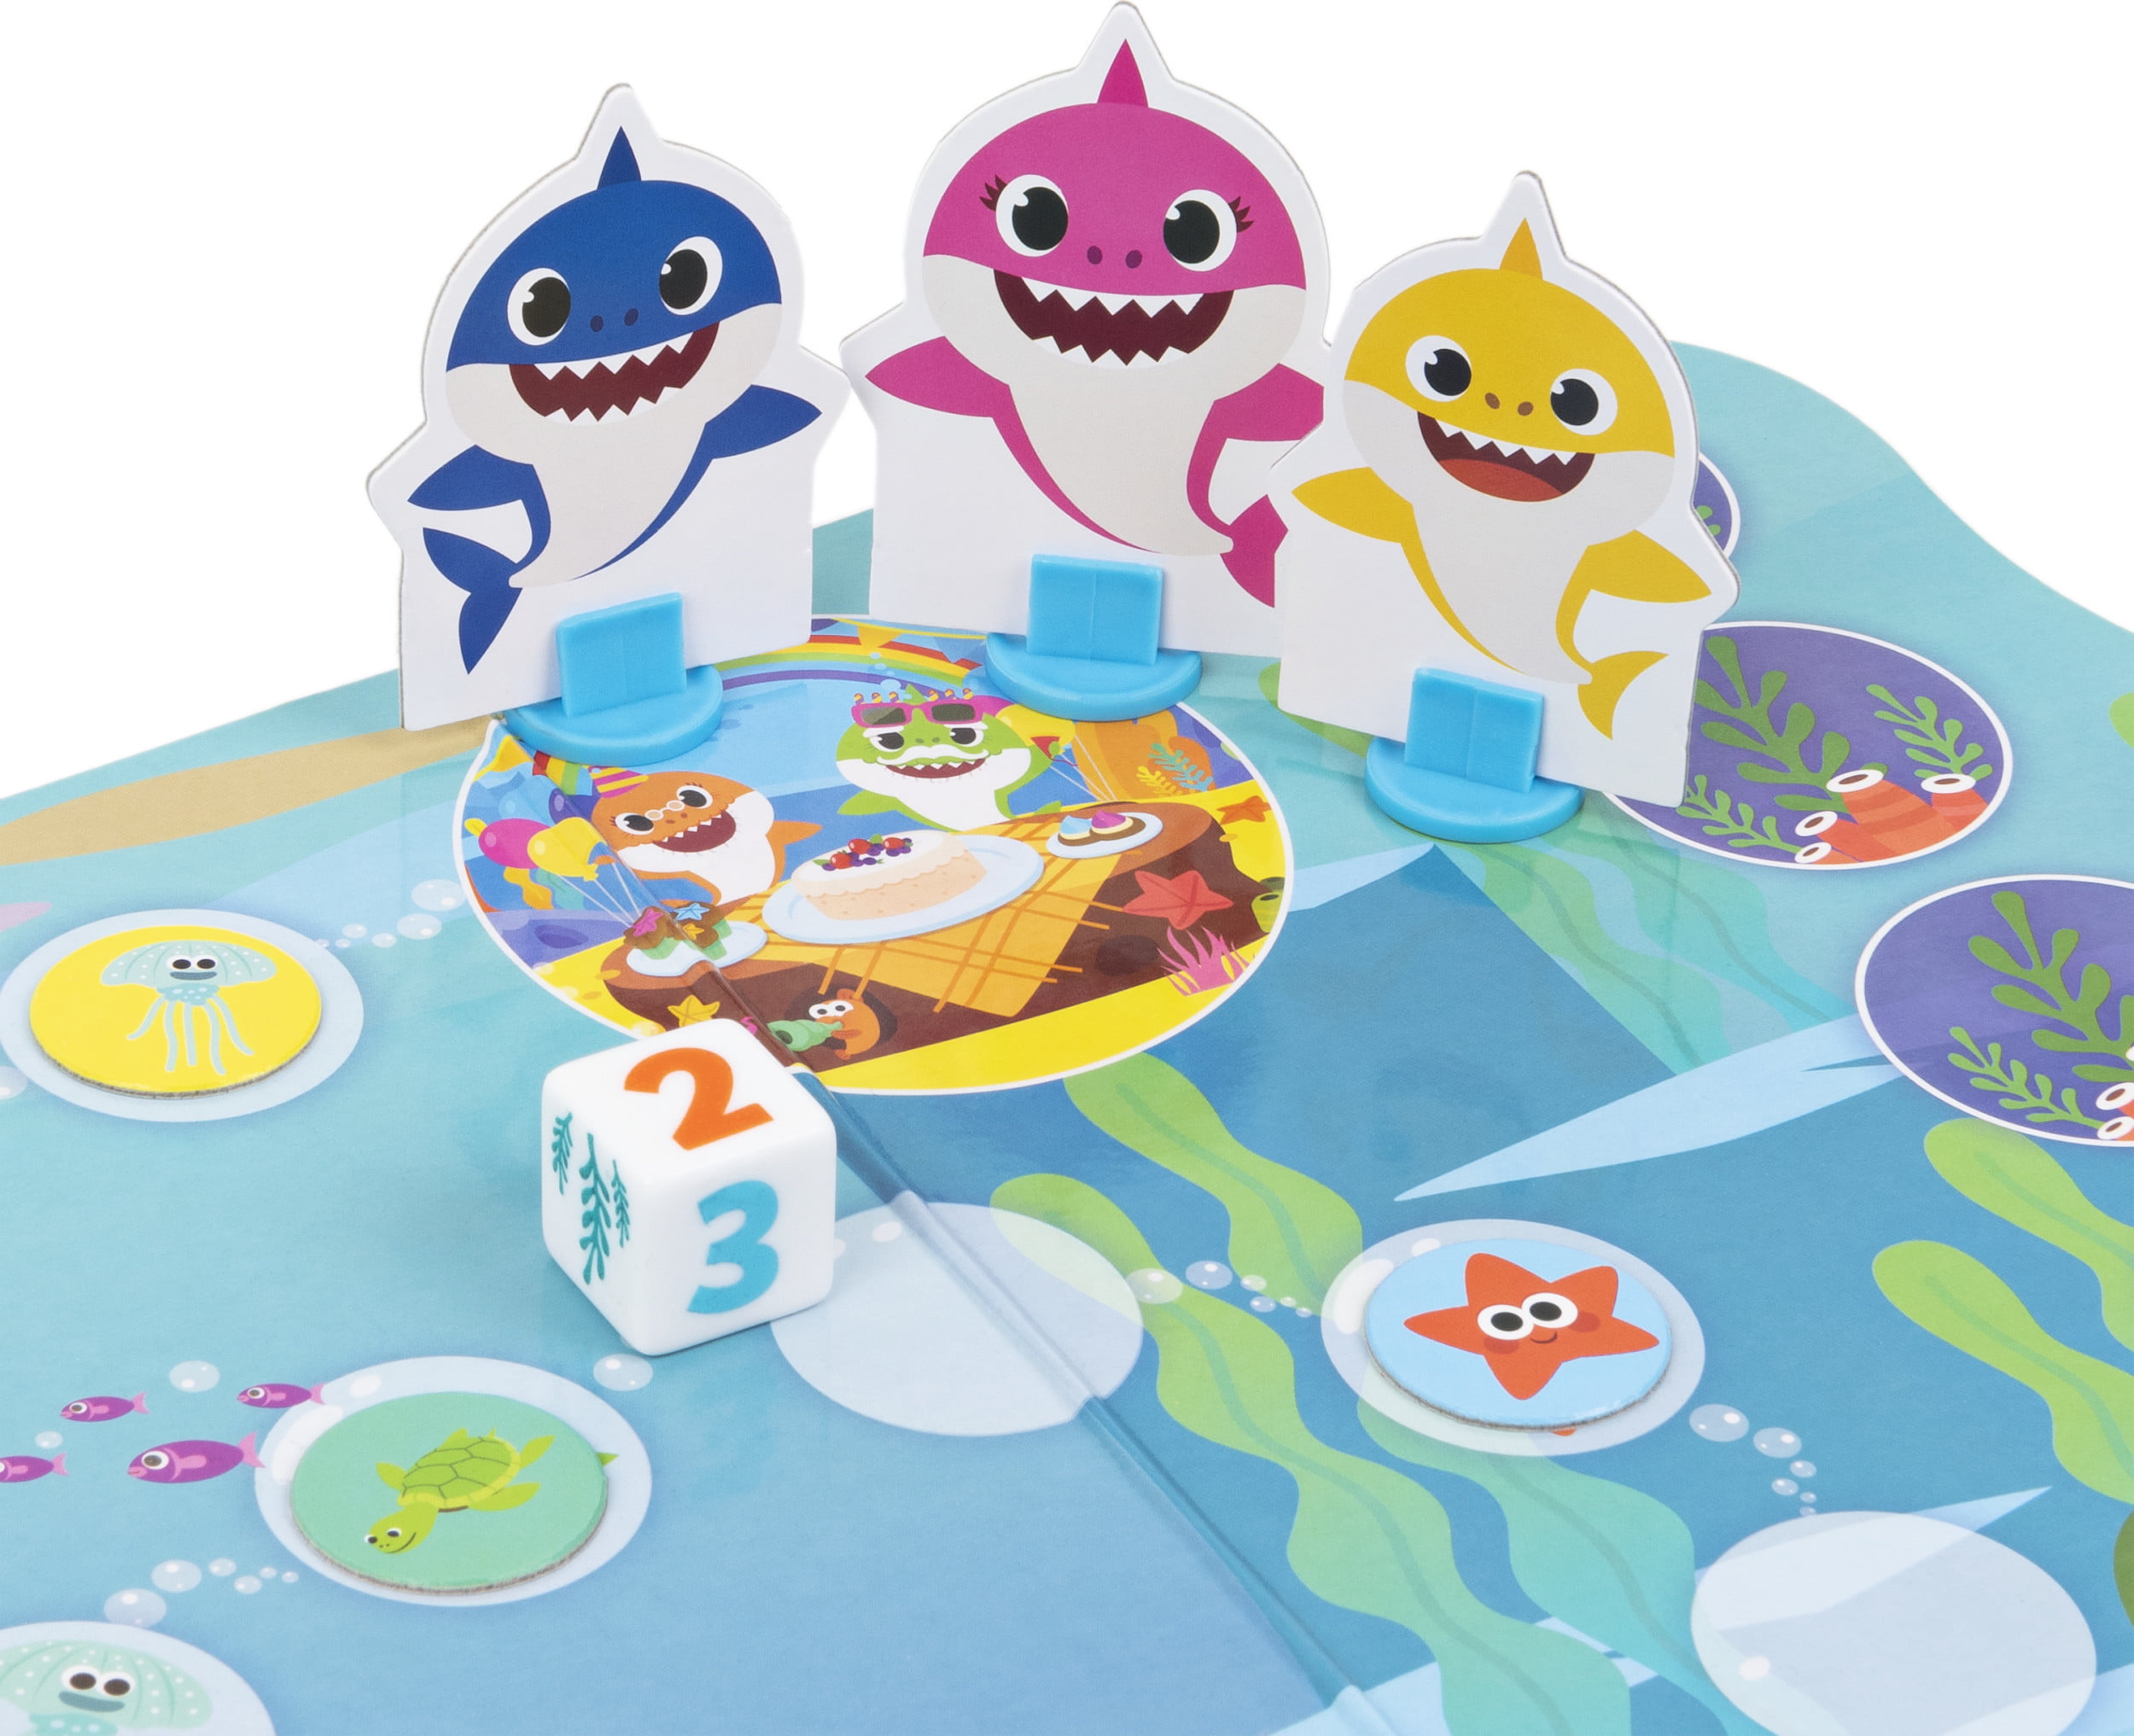 Baby Shark Childrens Play Time Pop Up Board Game, Ages 3-8 